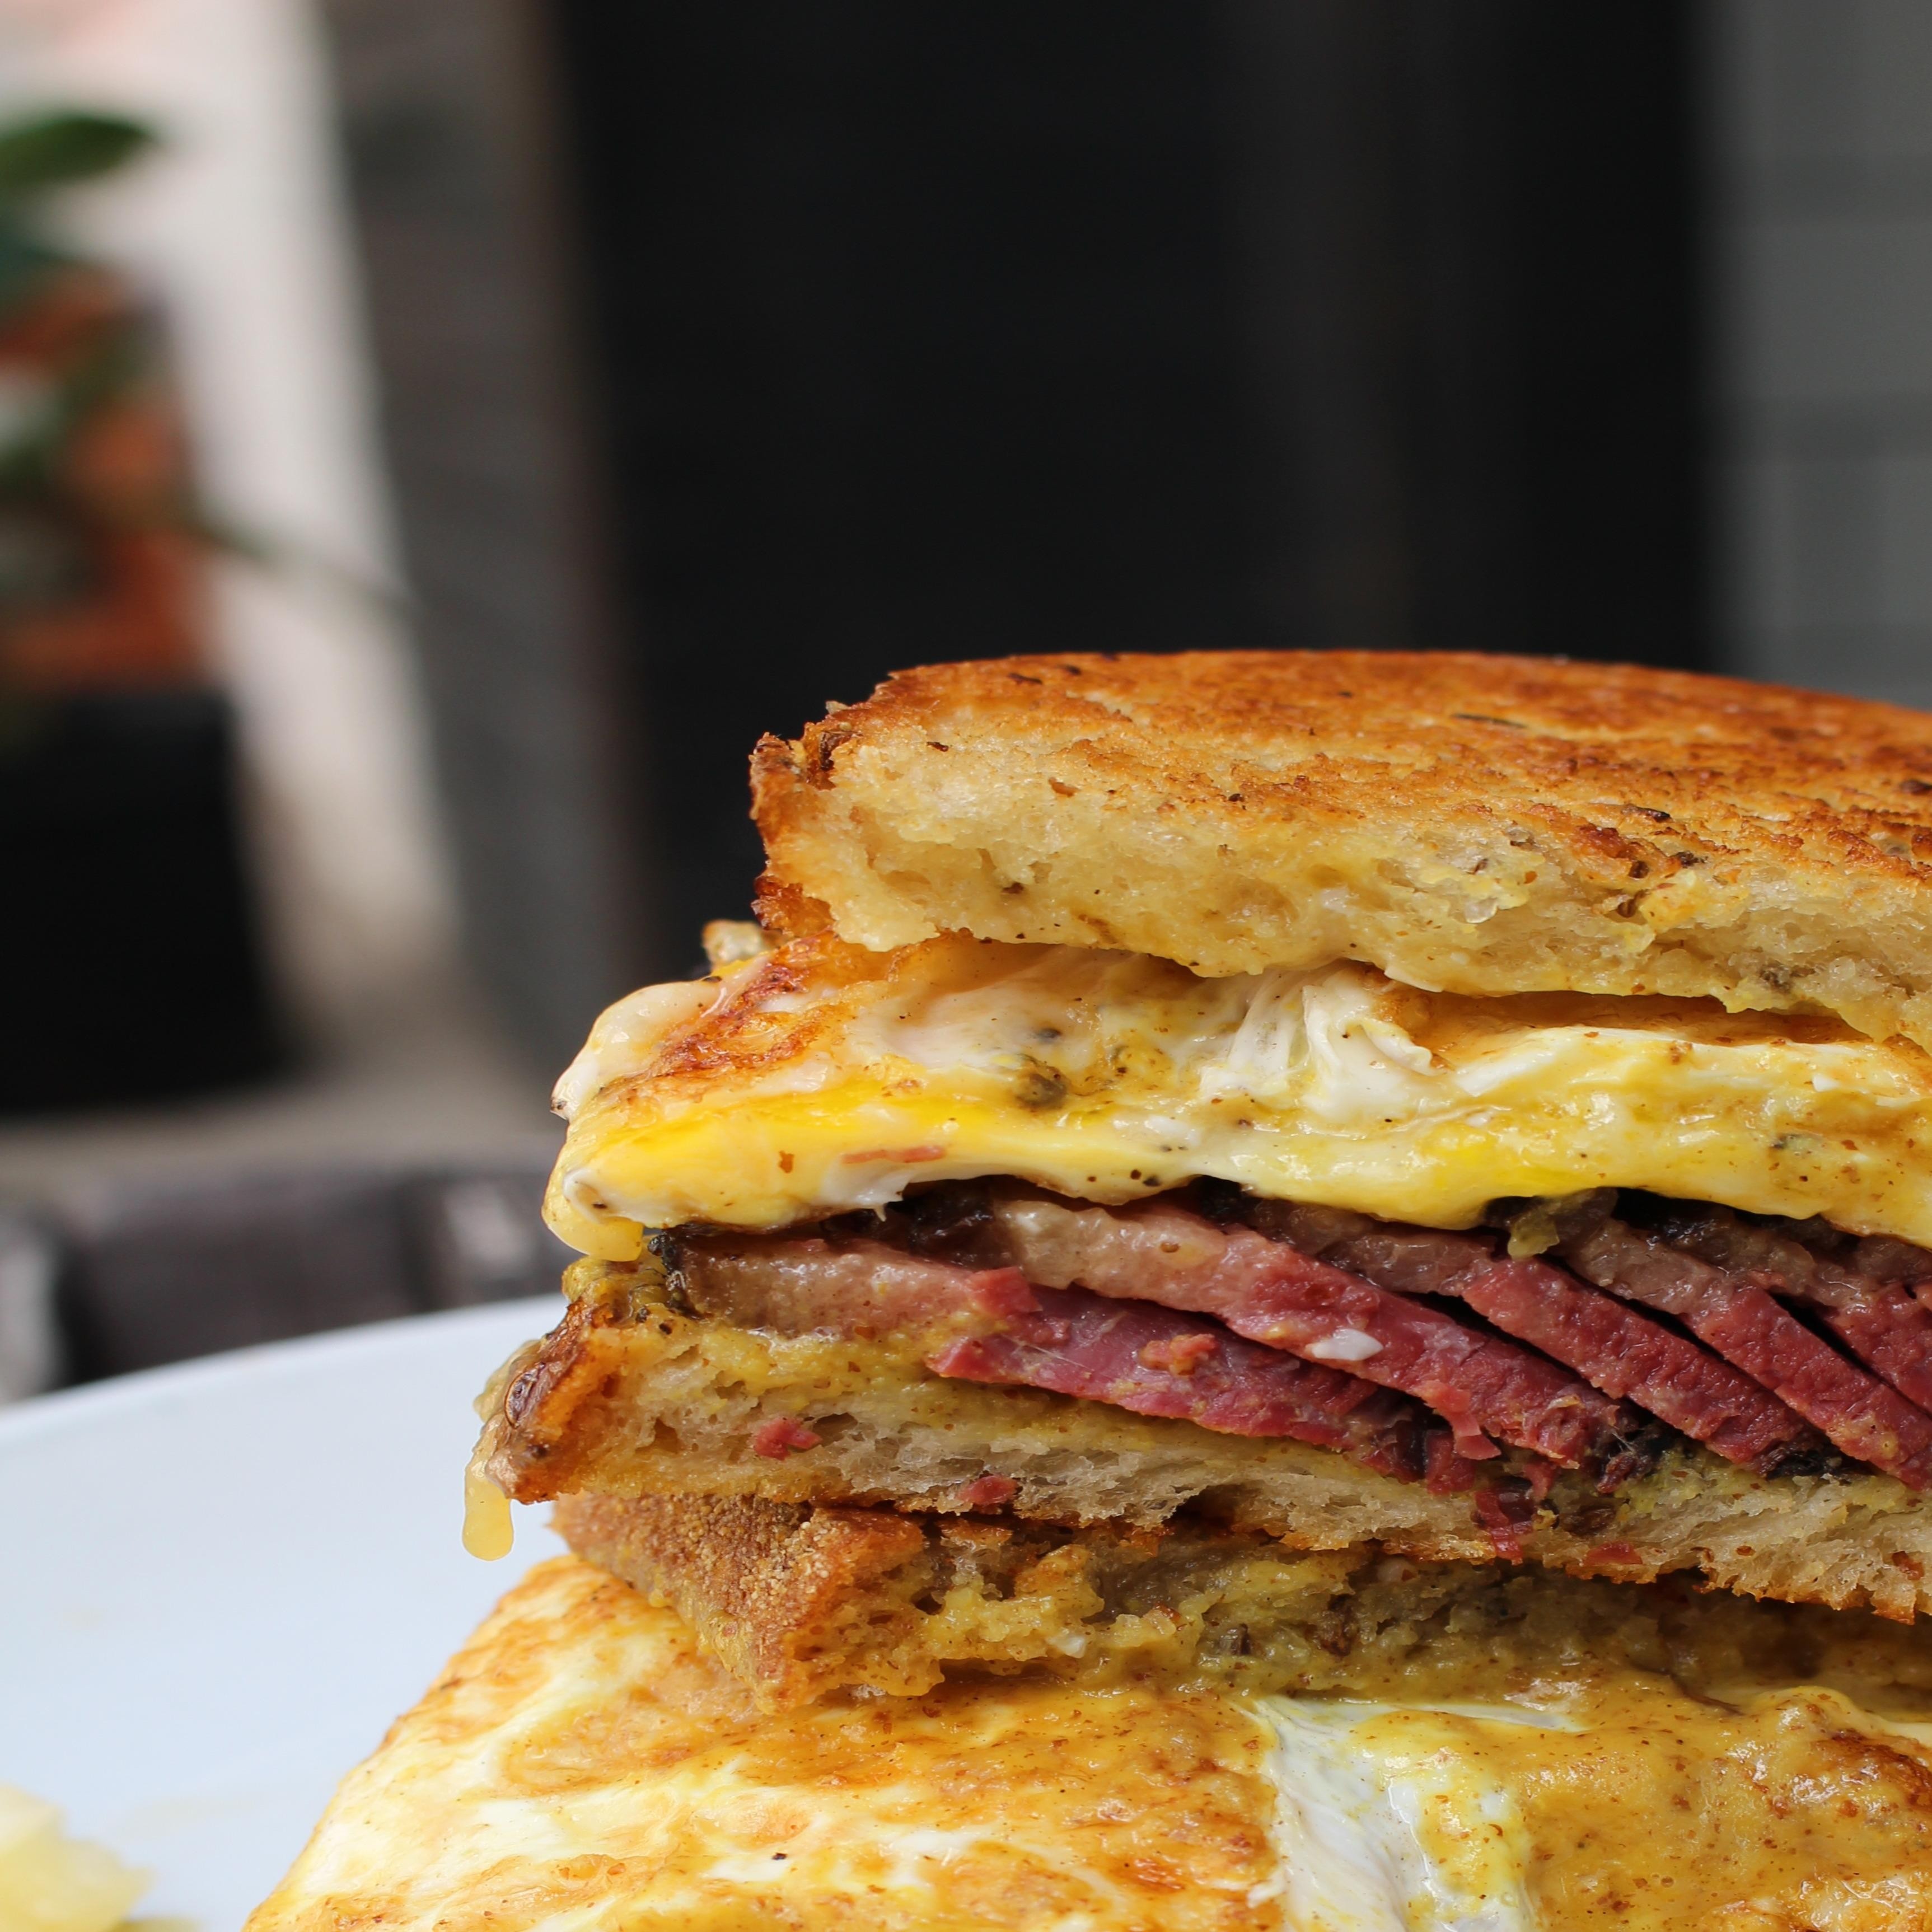 Smoked Meat, Egg & Cheese